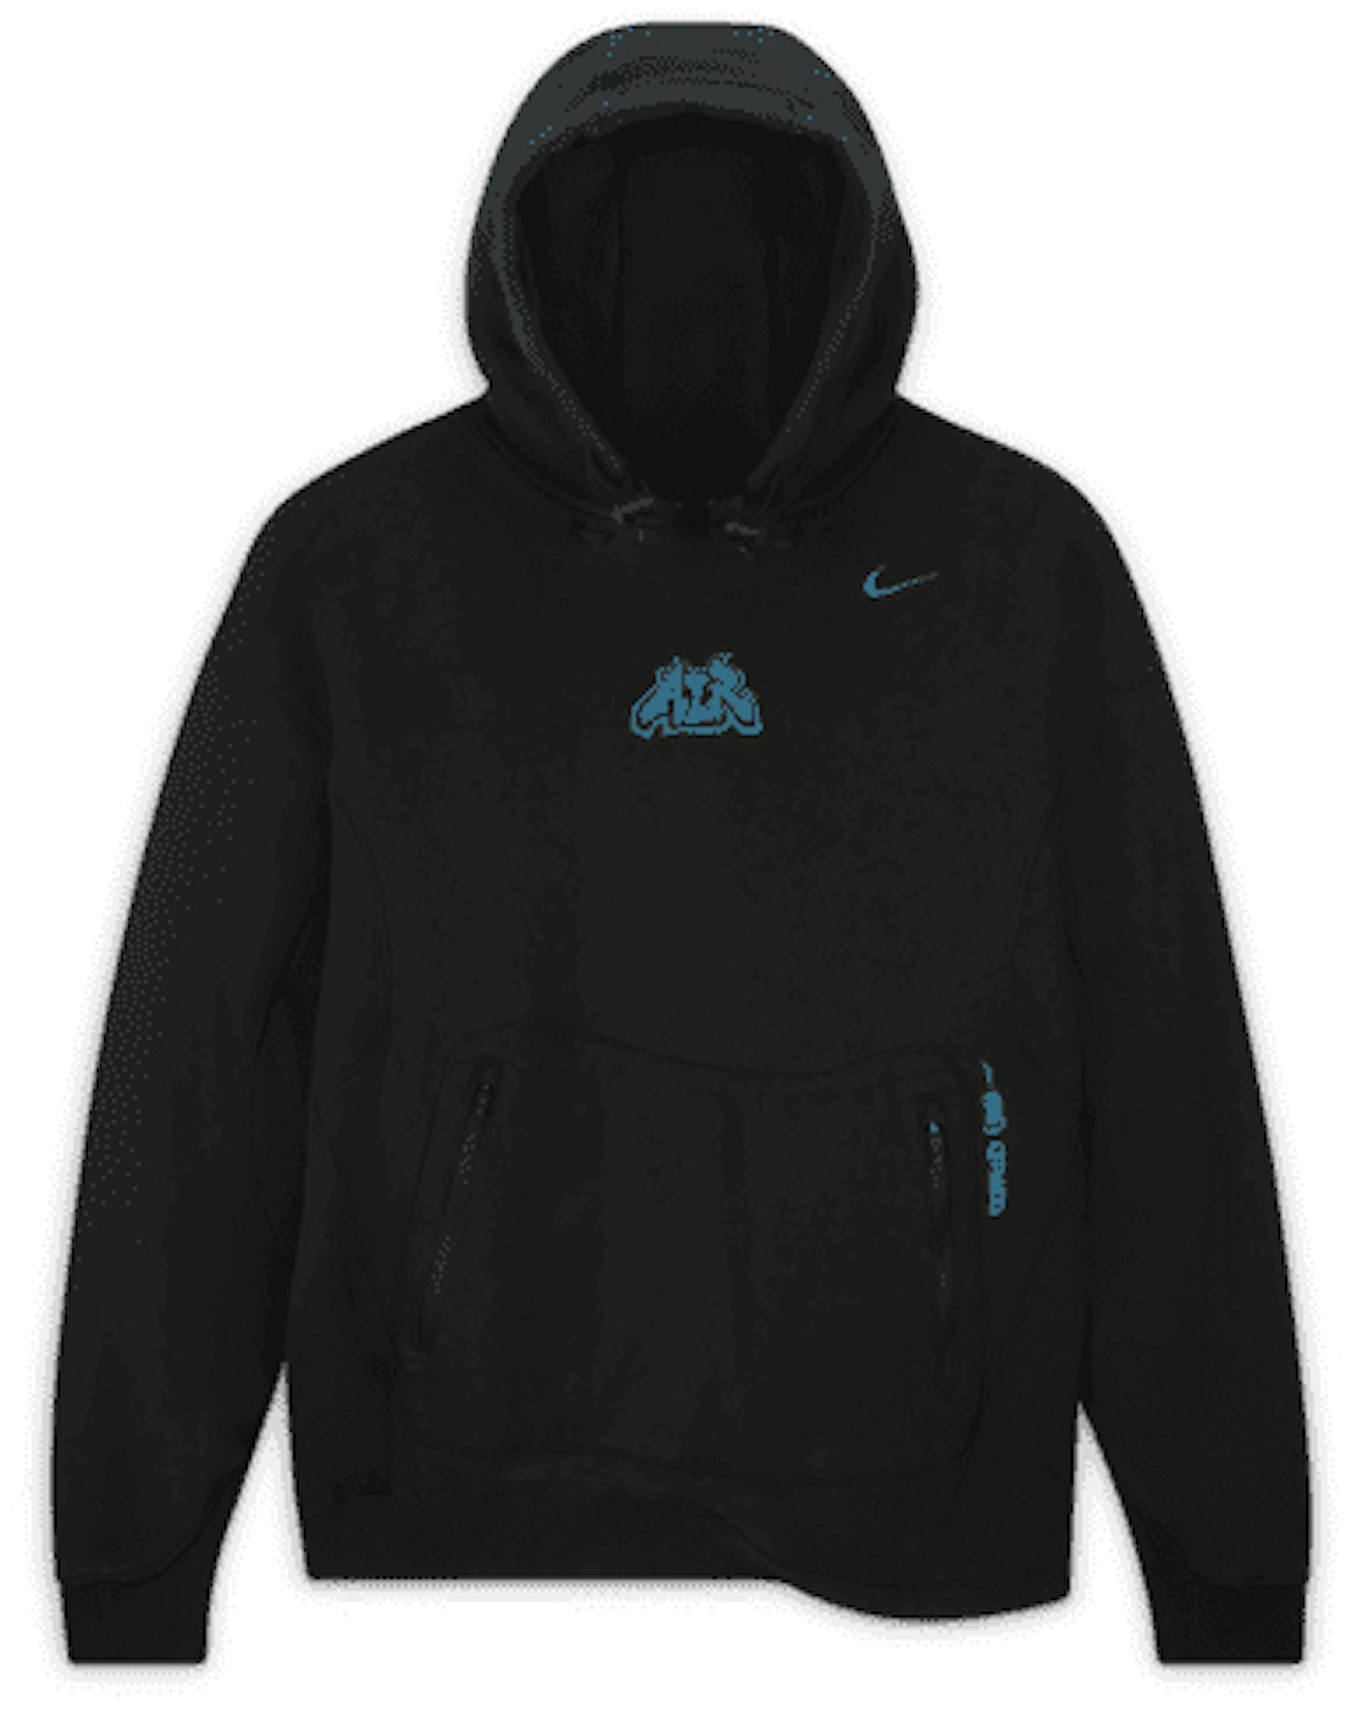 NBA Ultra Game Soft Fleece Pullover Hoodie - The Film Jacket